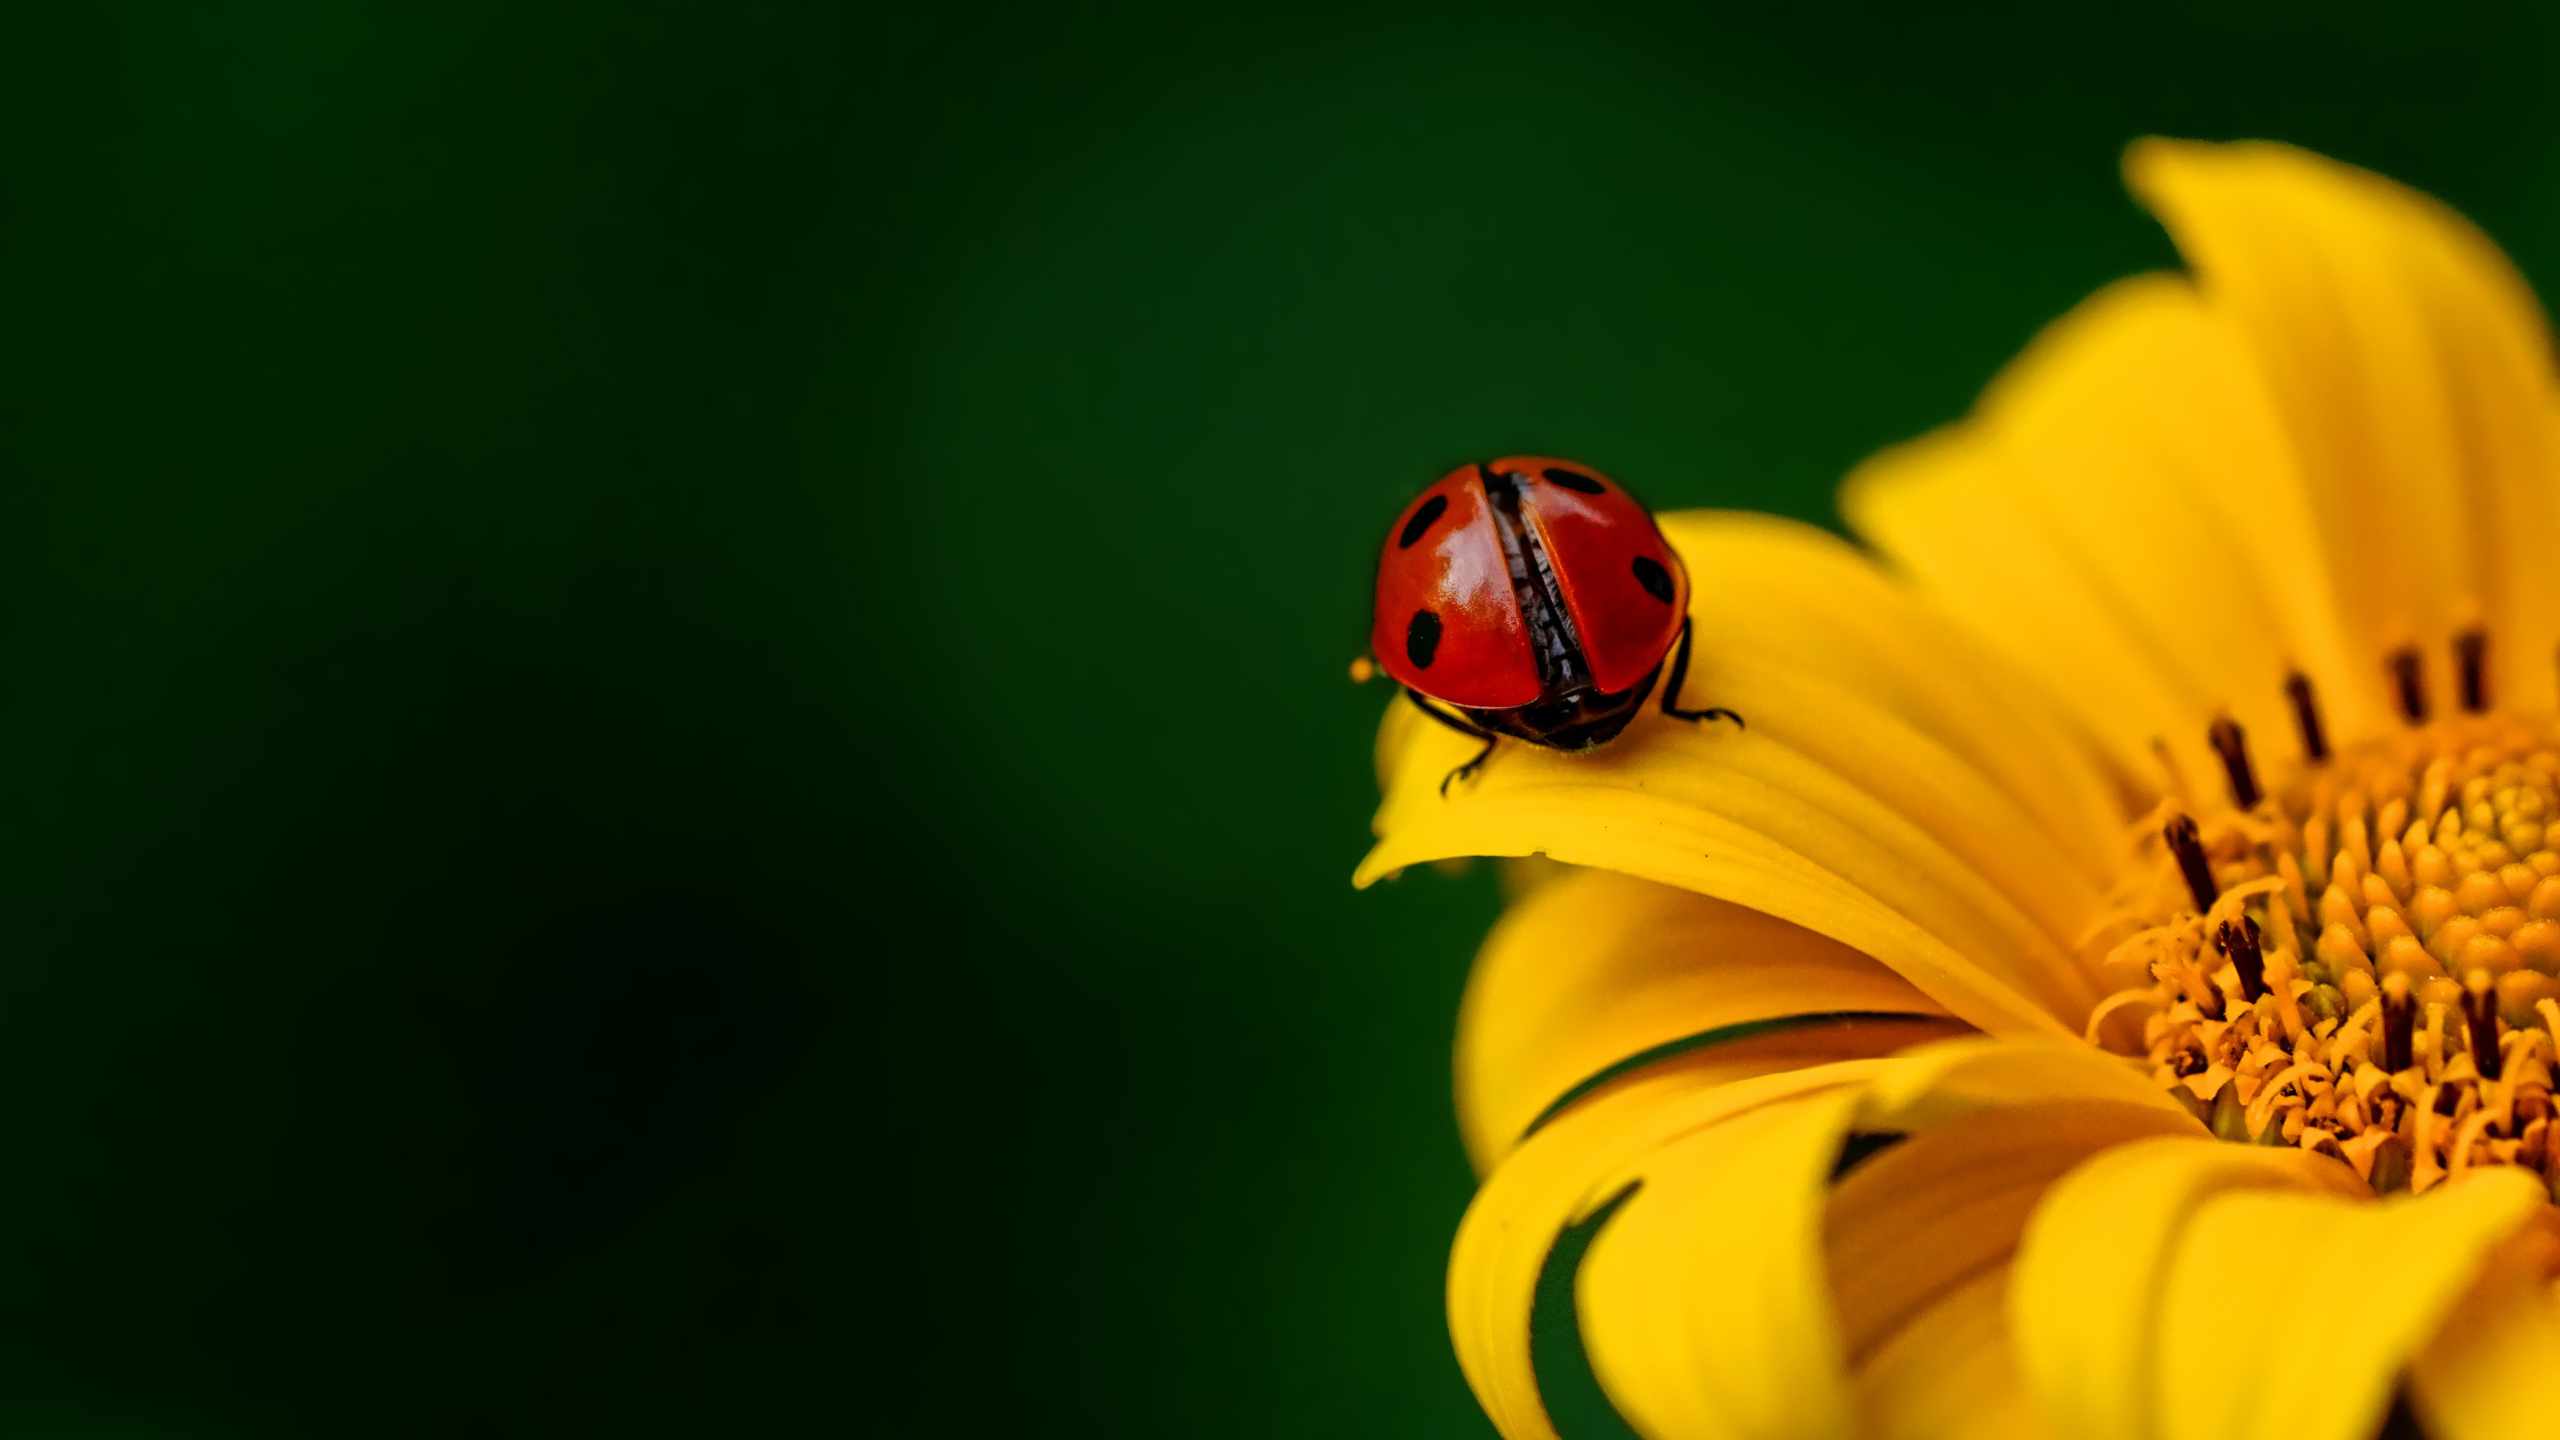 How Do You Attract Ladybugs To Your Garden